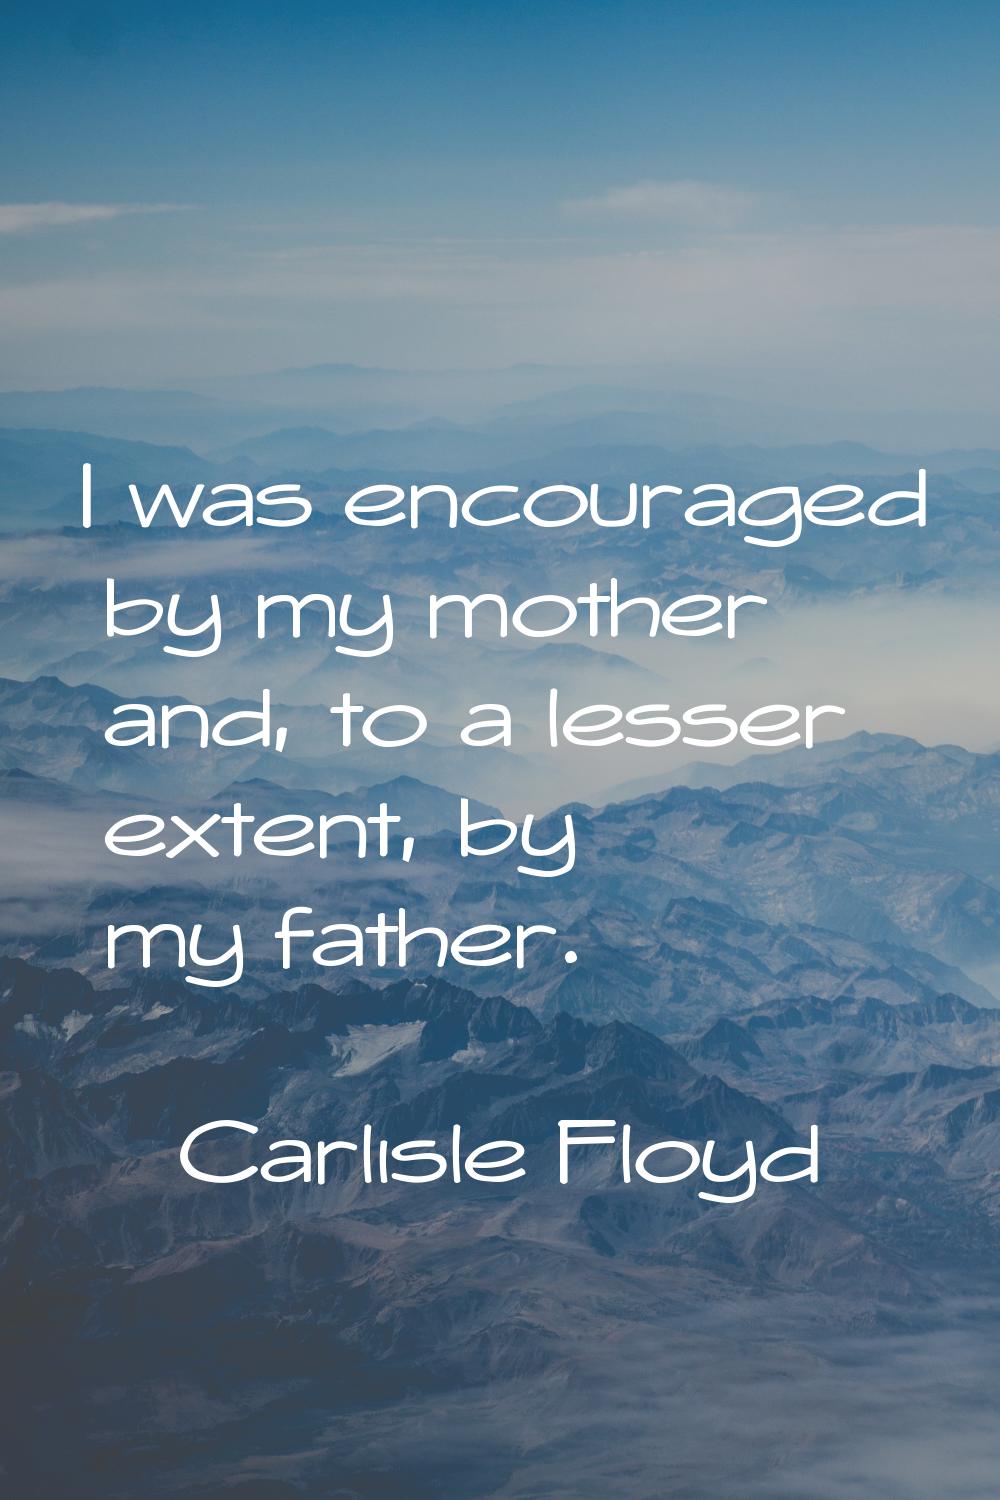 I was encouraged by my mother and, to a lesser extent, by my father.